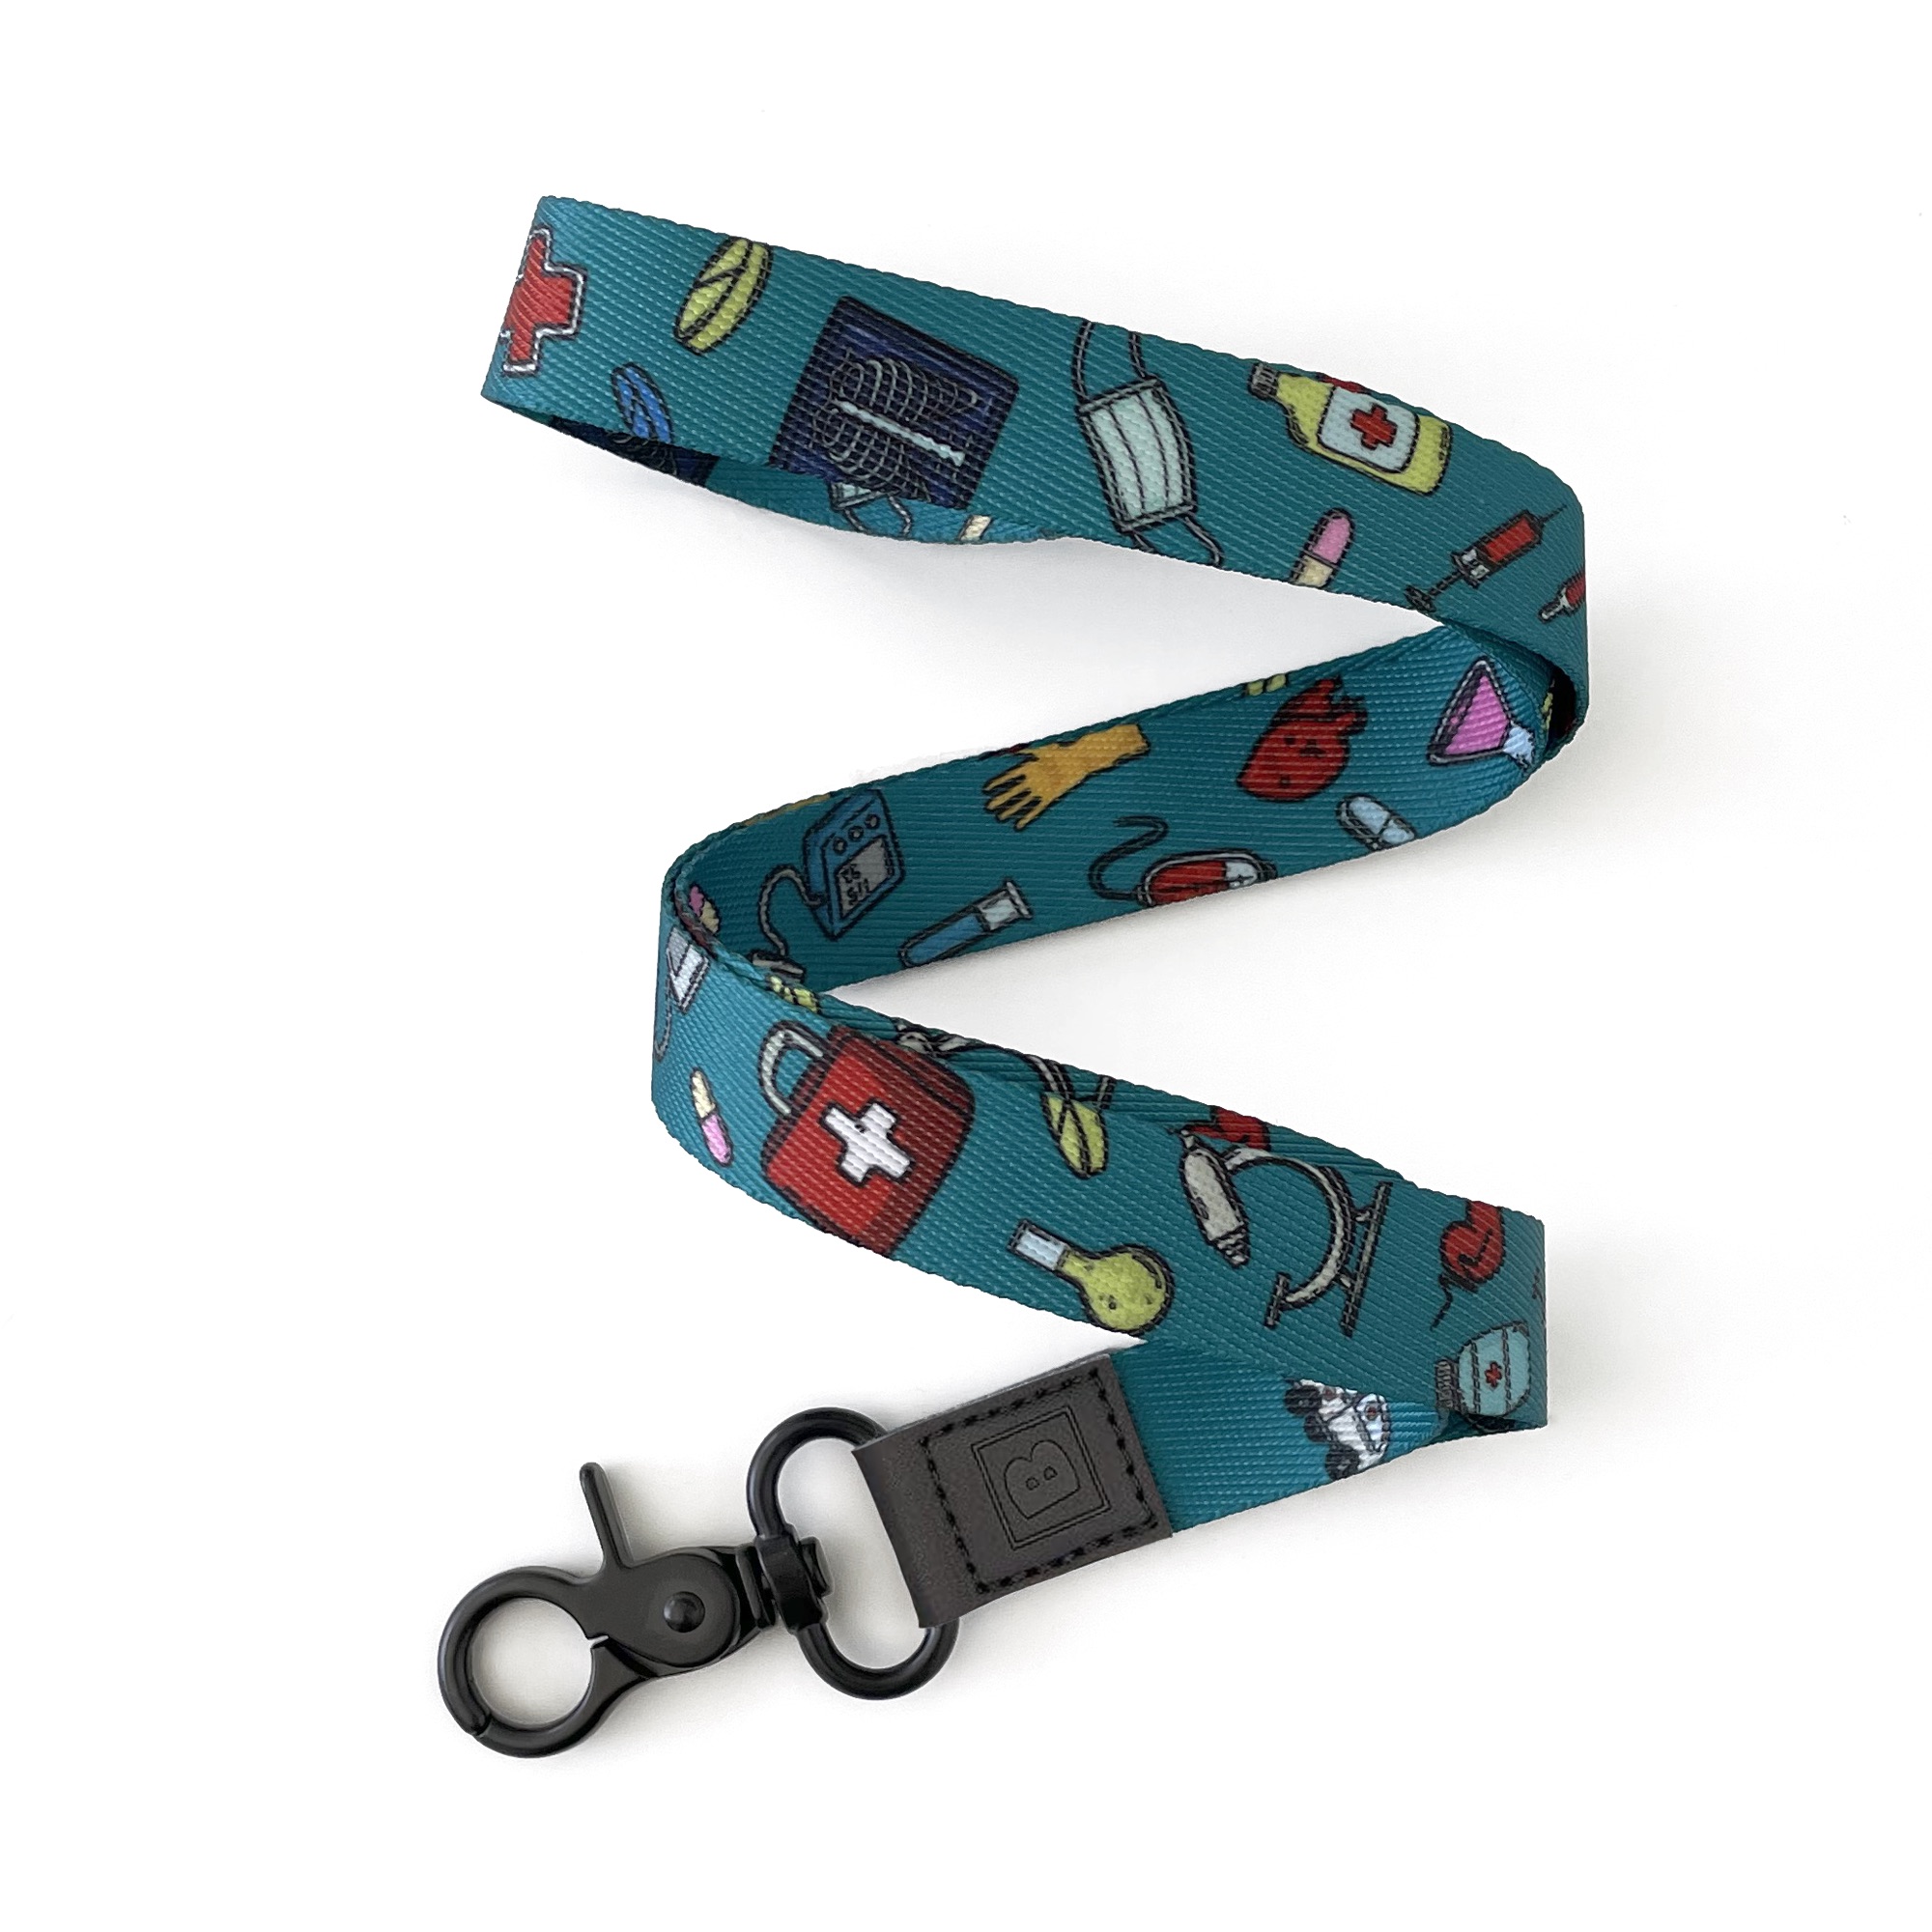 Teal Remedy: Dark Teal Lanyard with Medical Icons and Elements – Unite Style and Medical Expertise! by BadgeZoo